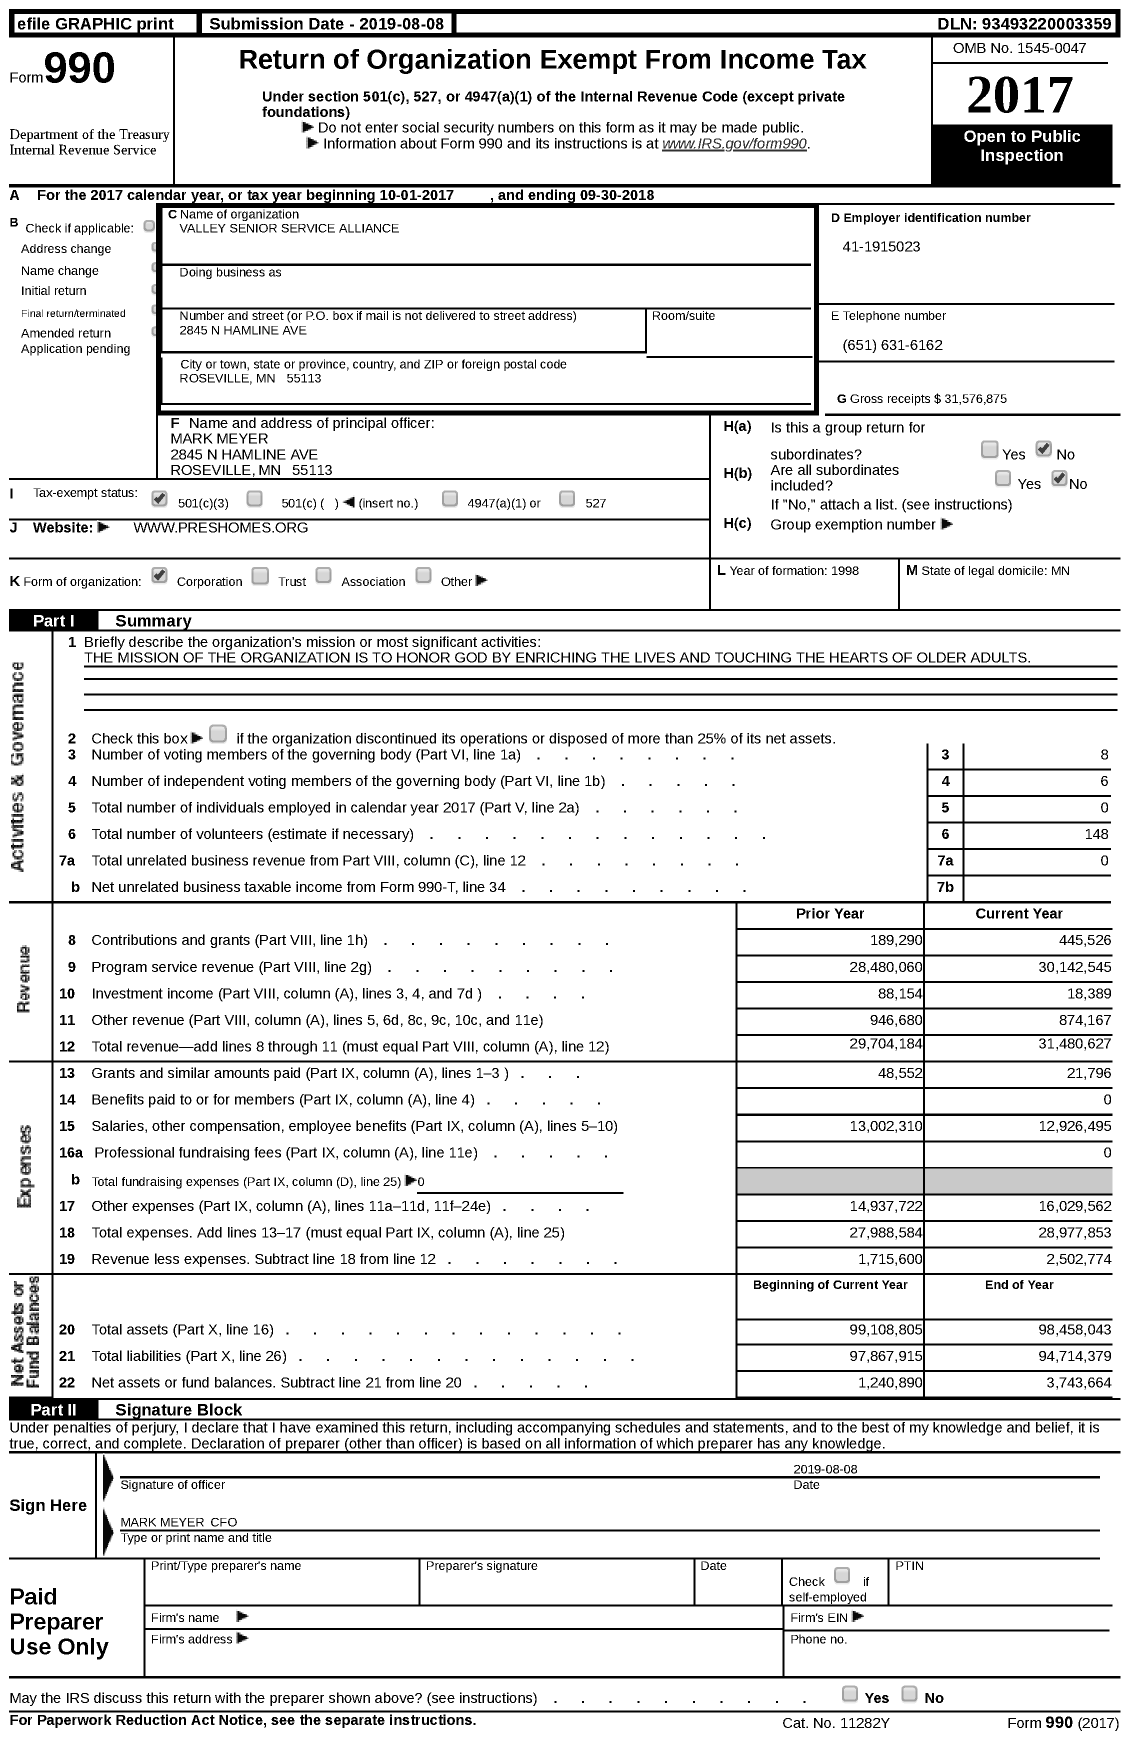 Image of first page of 2017 Form 990 for Valley Senior Services Alliance